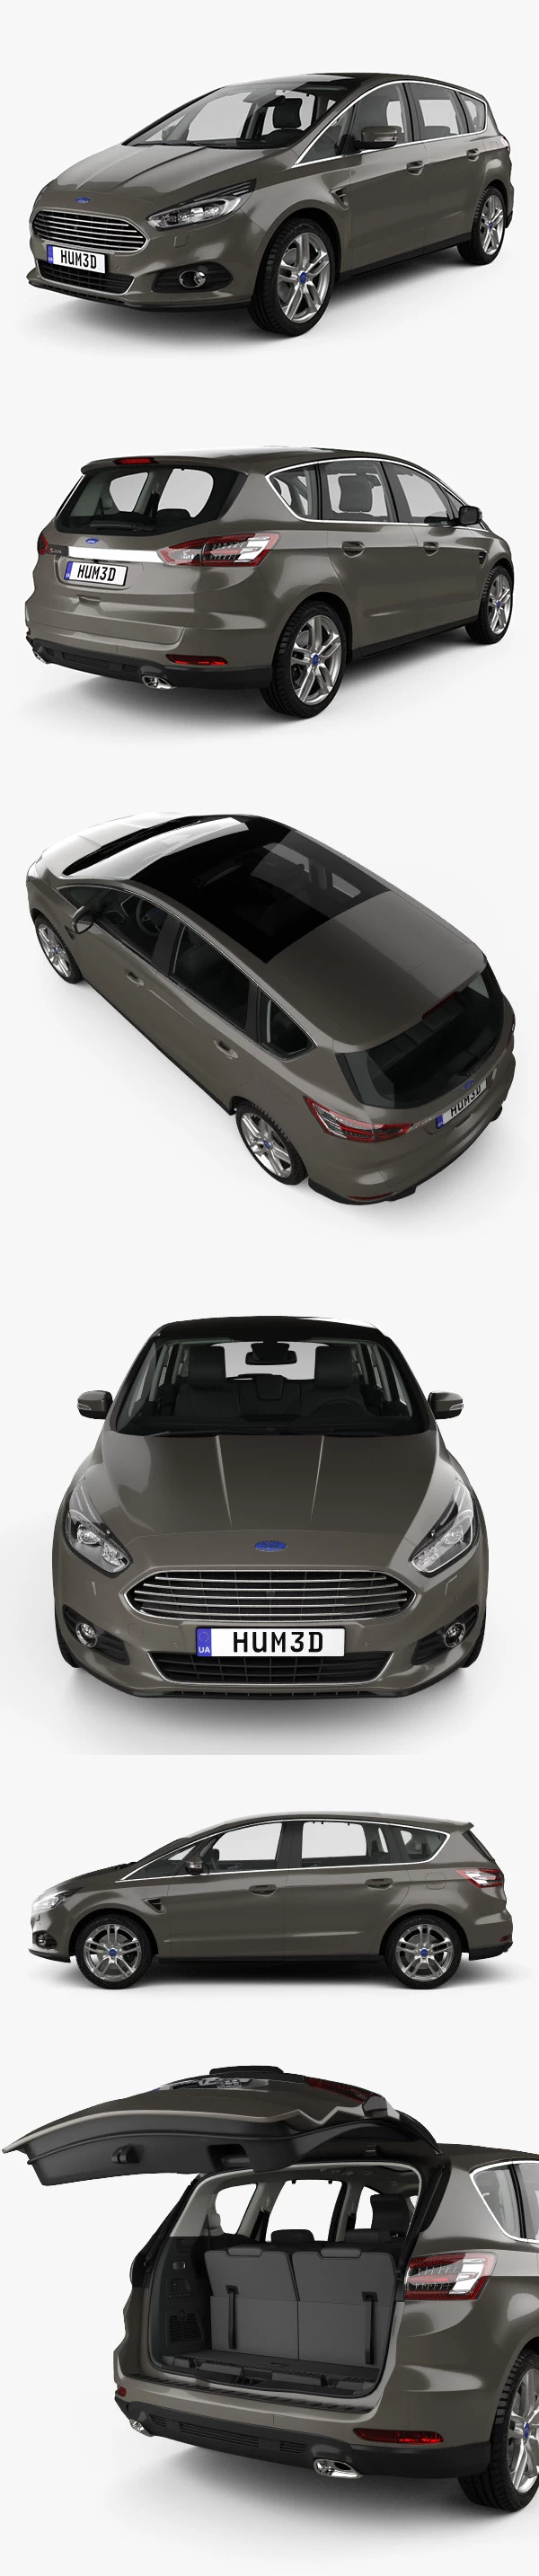 Ford S-MAX with HQ interior 2015 3D Model